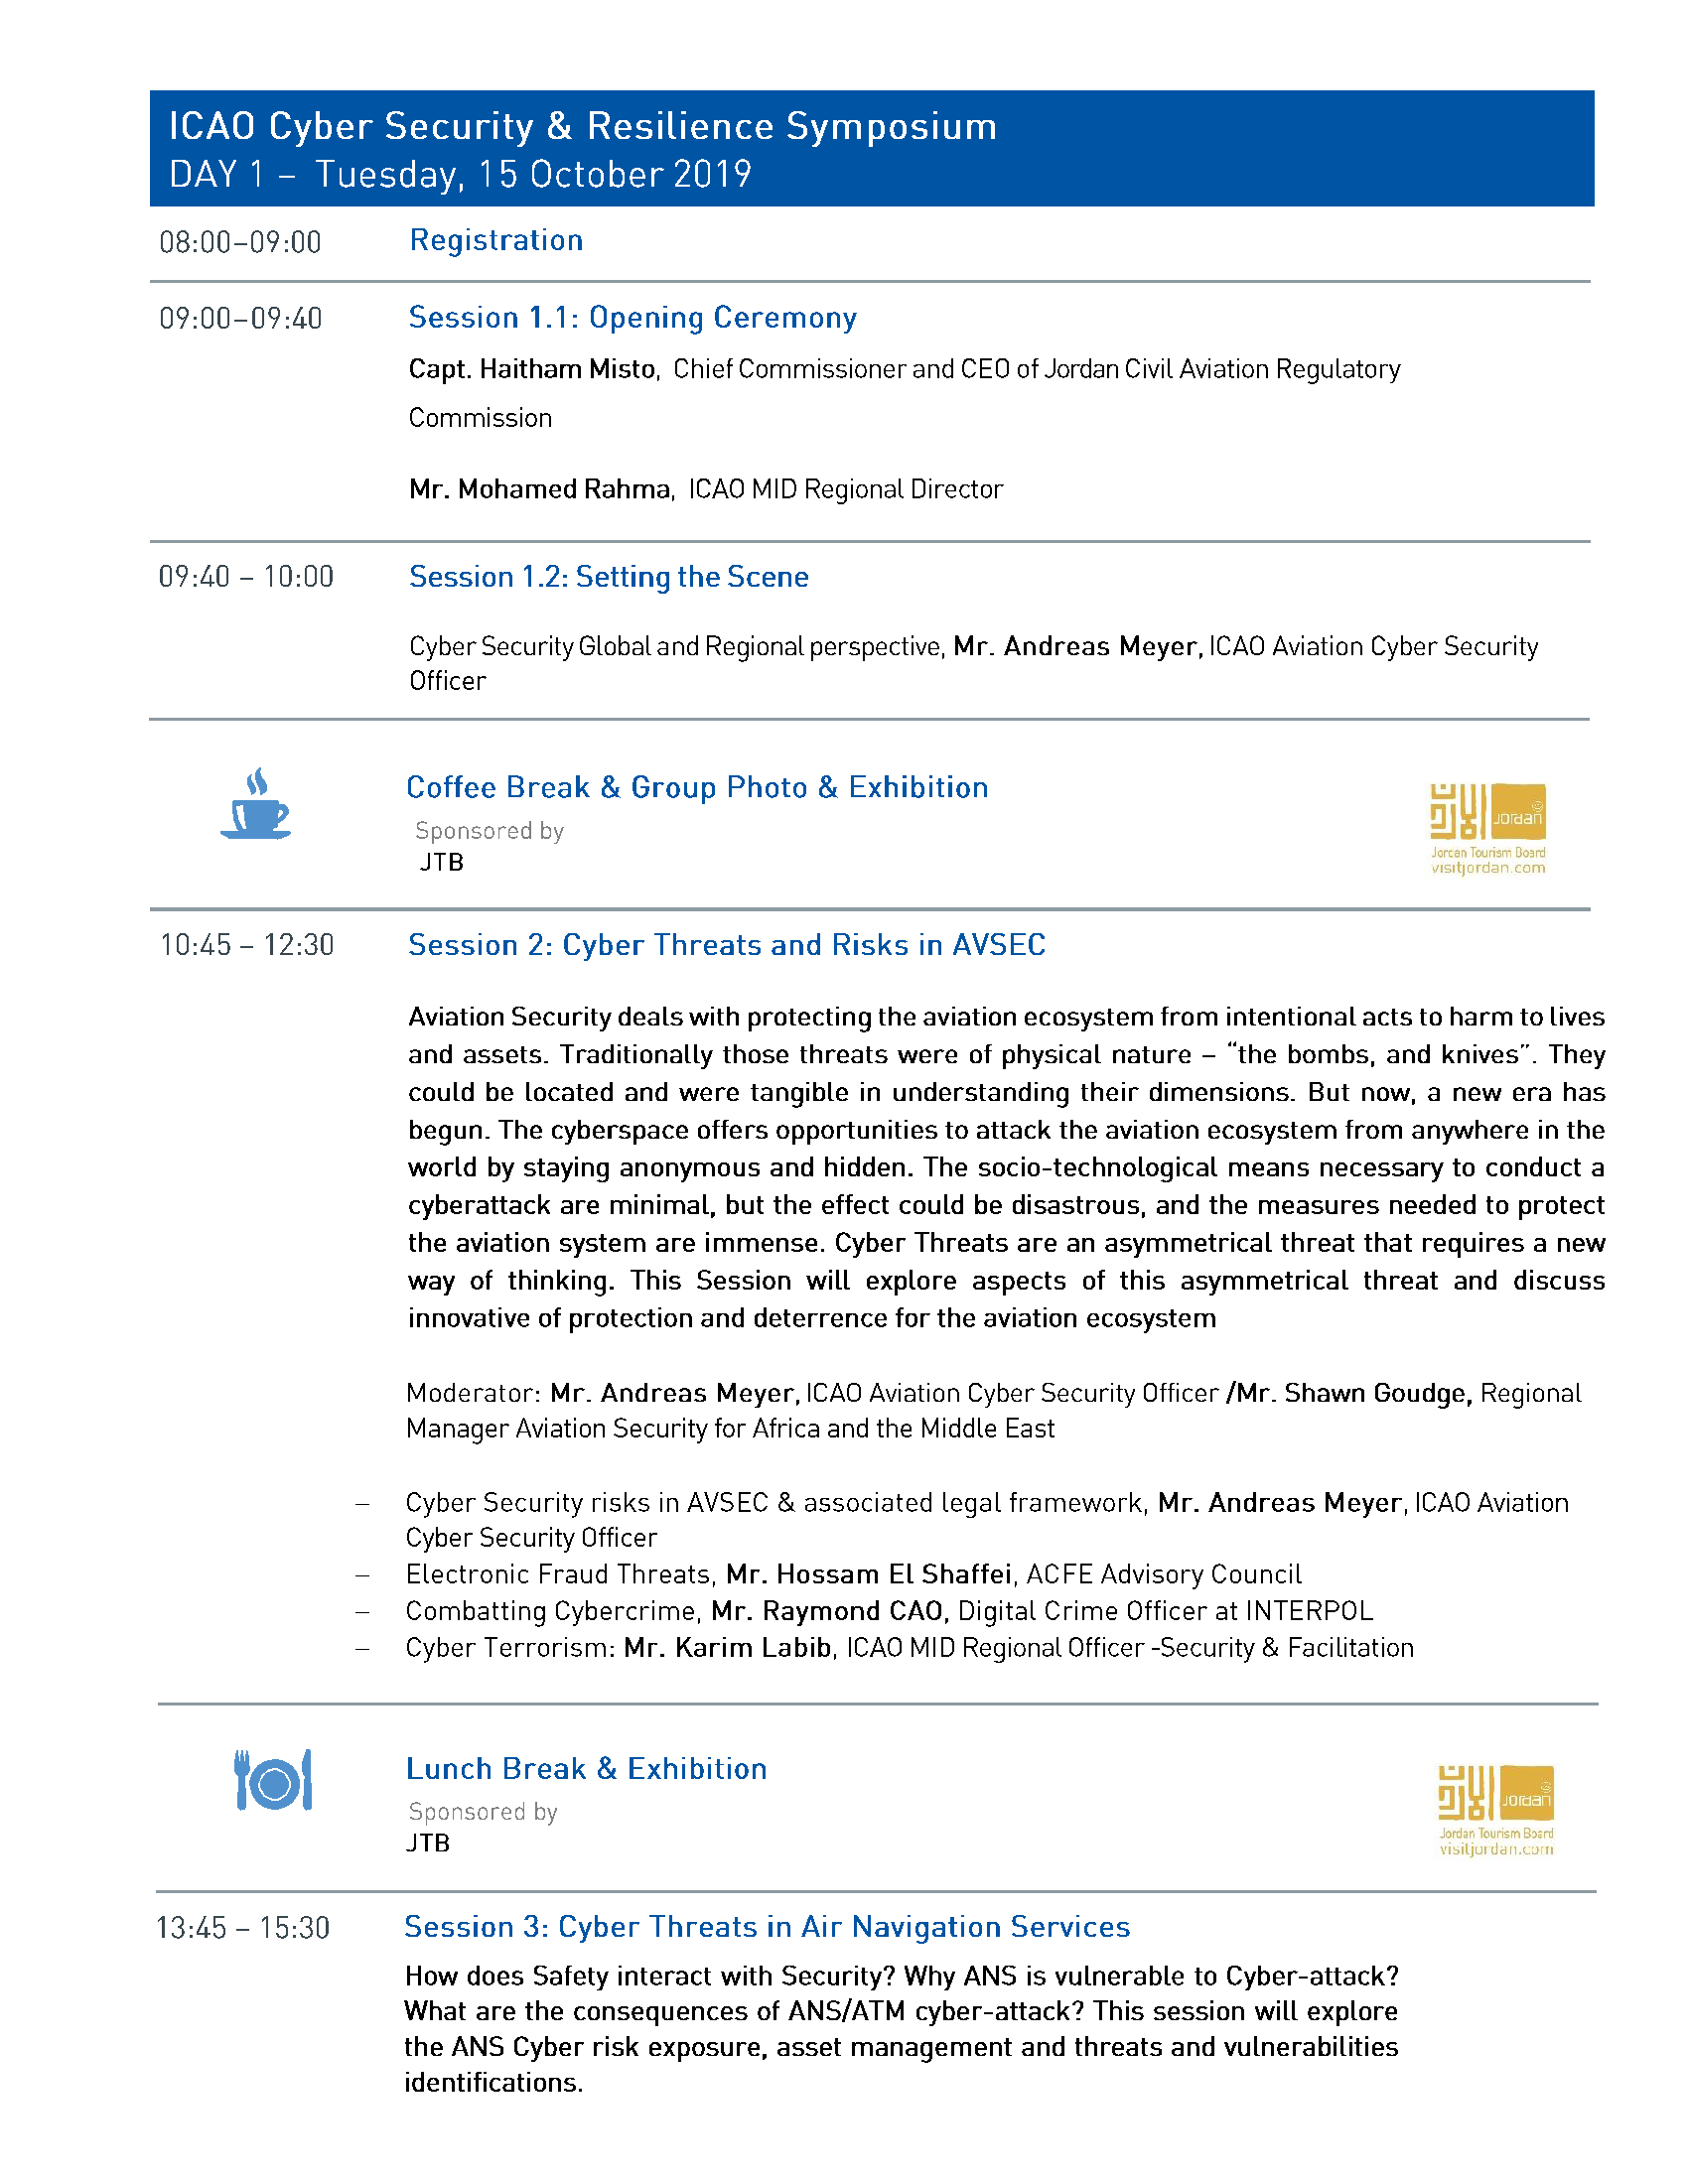 ICAO Cybersecurity and Resilience Symposium 12 Oct 2019_Page_2.png